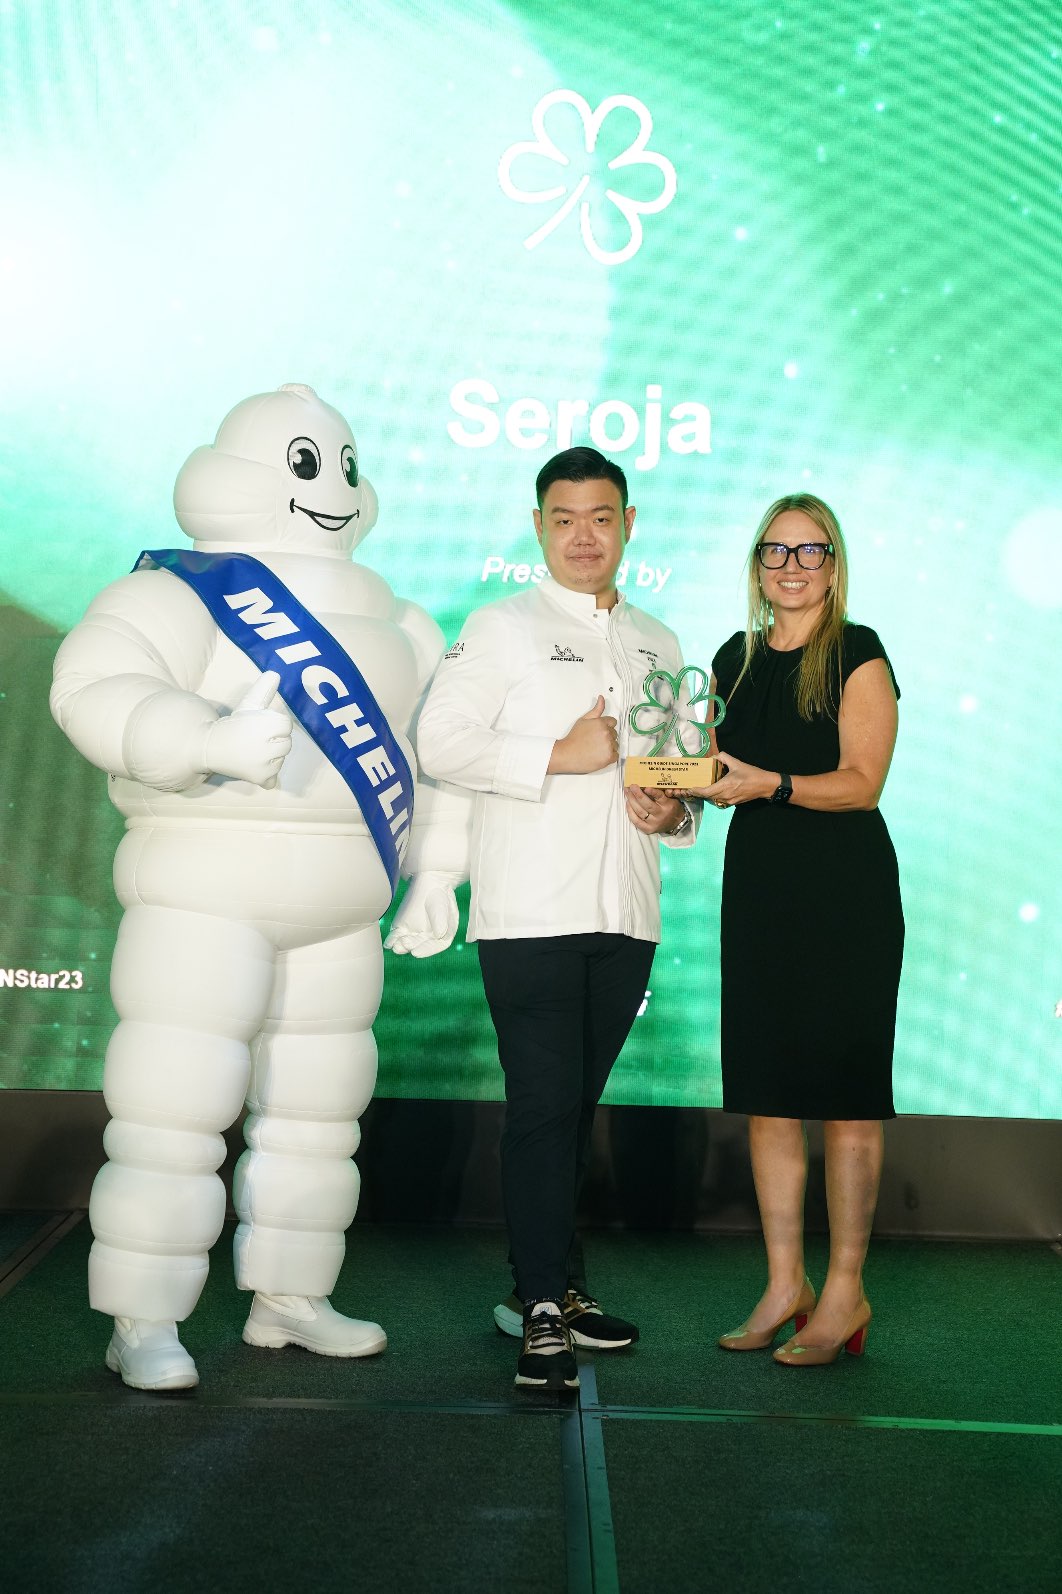 , Michelin Guide Singapore 2023: Seroja grabs top awards, including the first Michelin Green Star